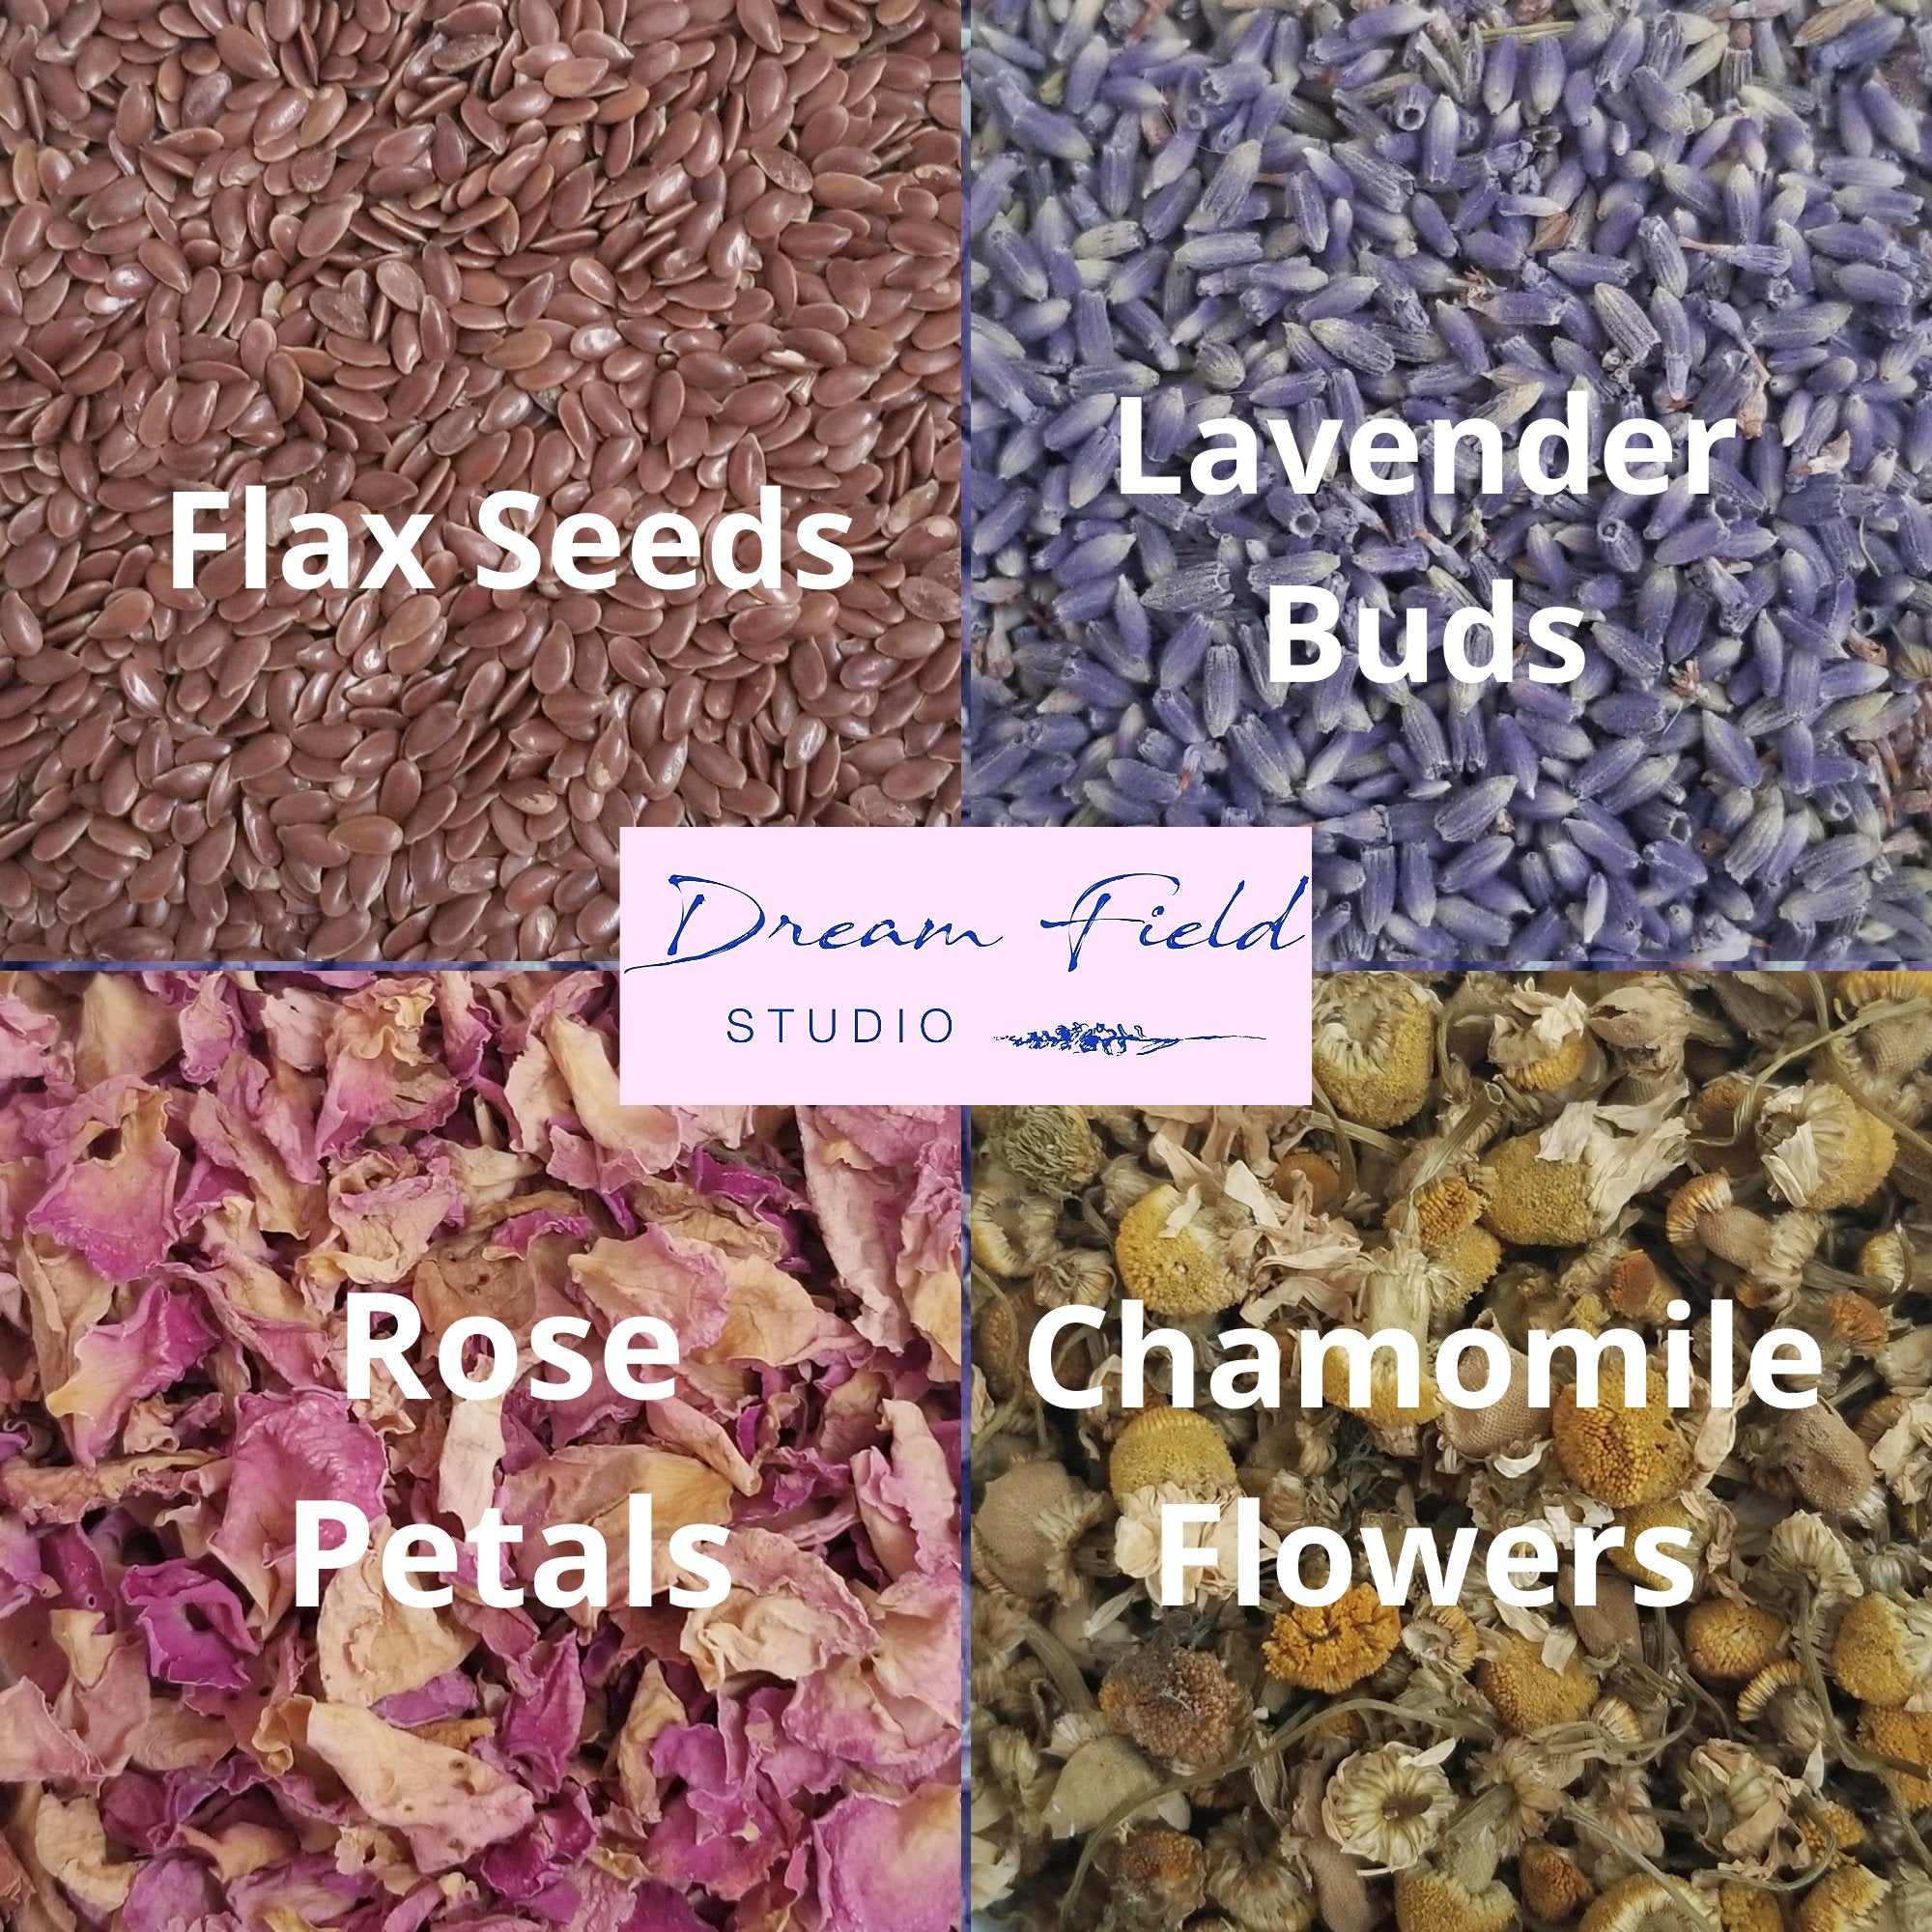 Infographic of flax seeds, lavender buds, rose petals and chamomile flowers